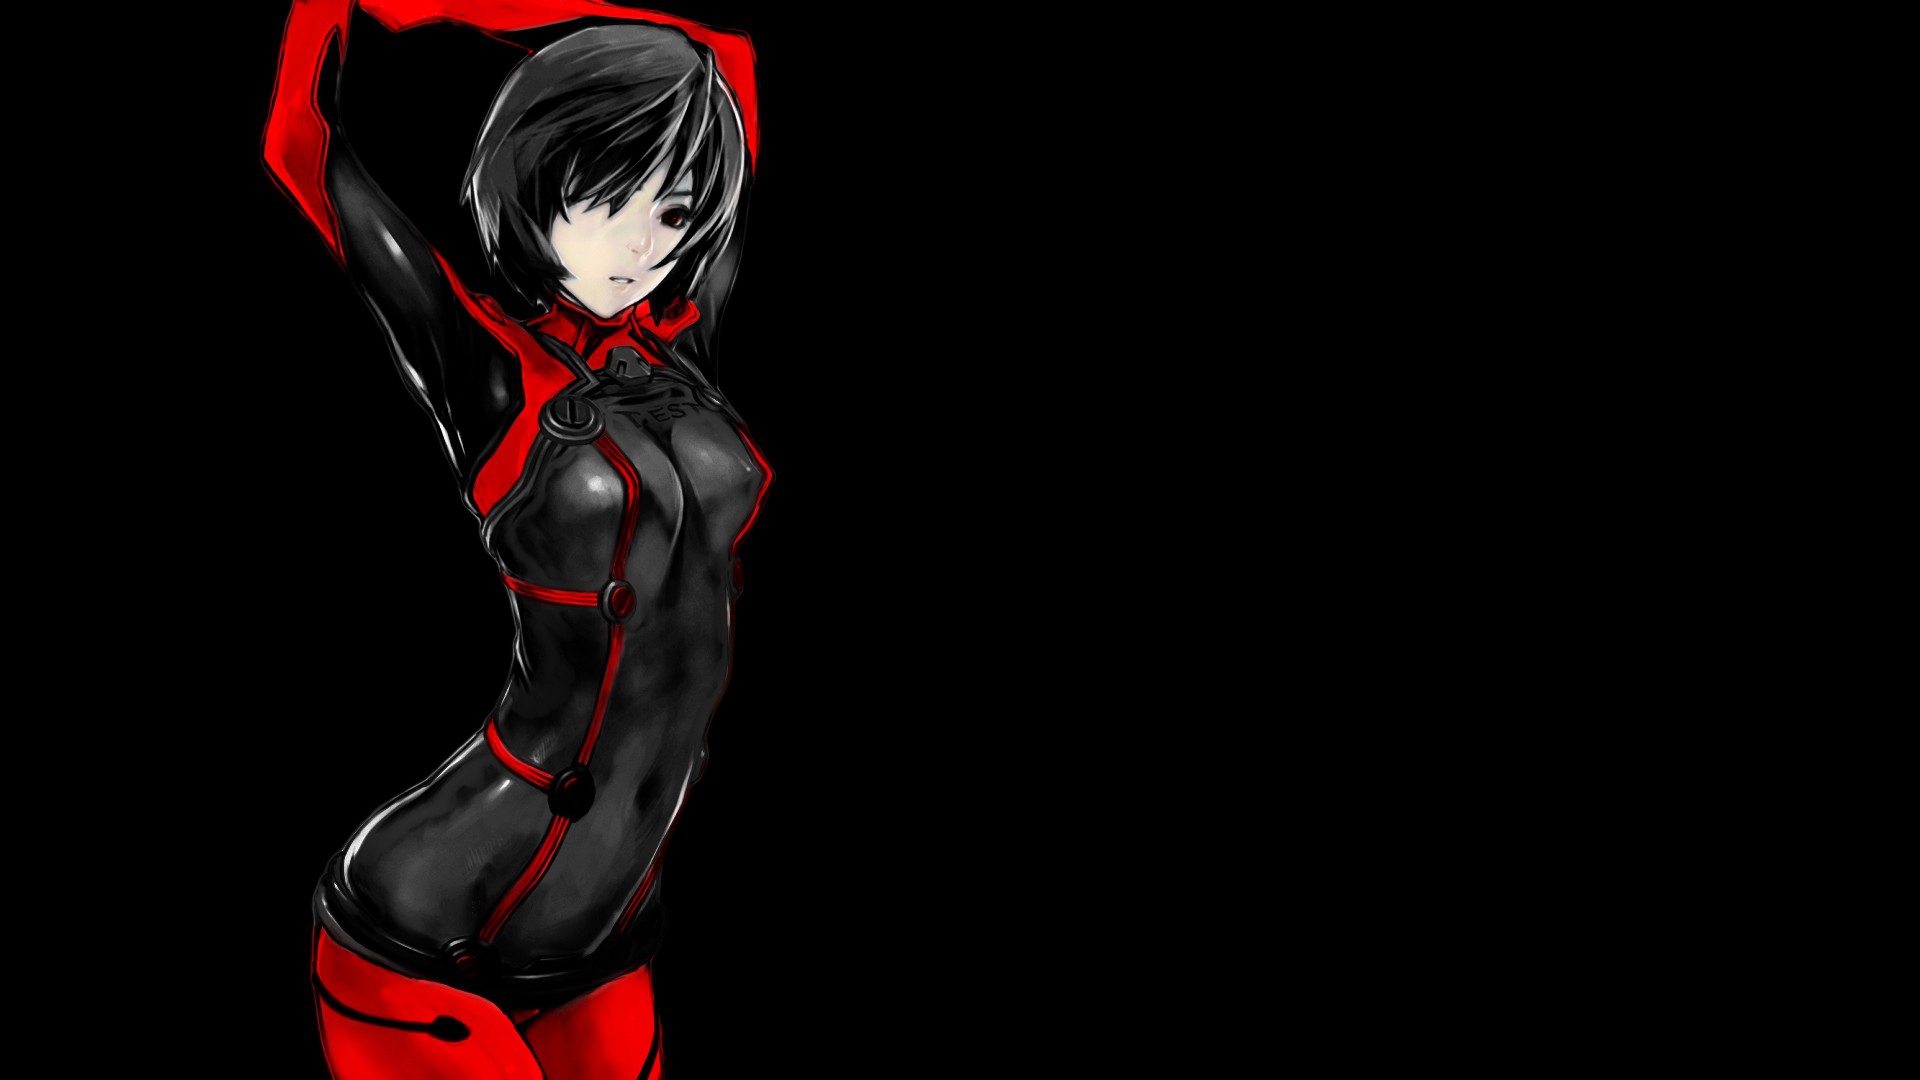 Anime Wallpaper Black And Red